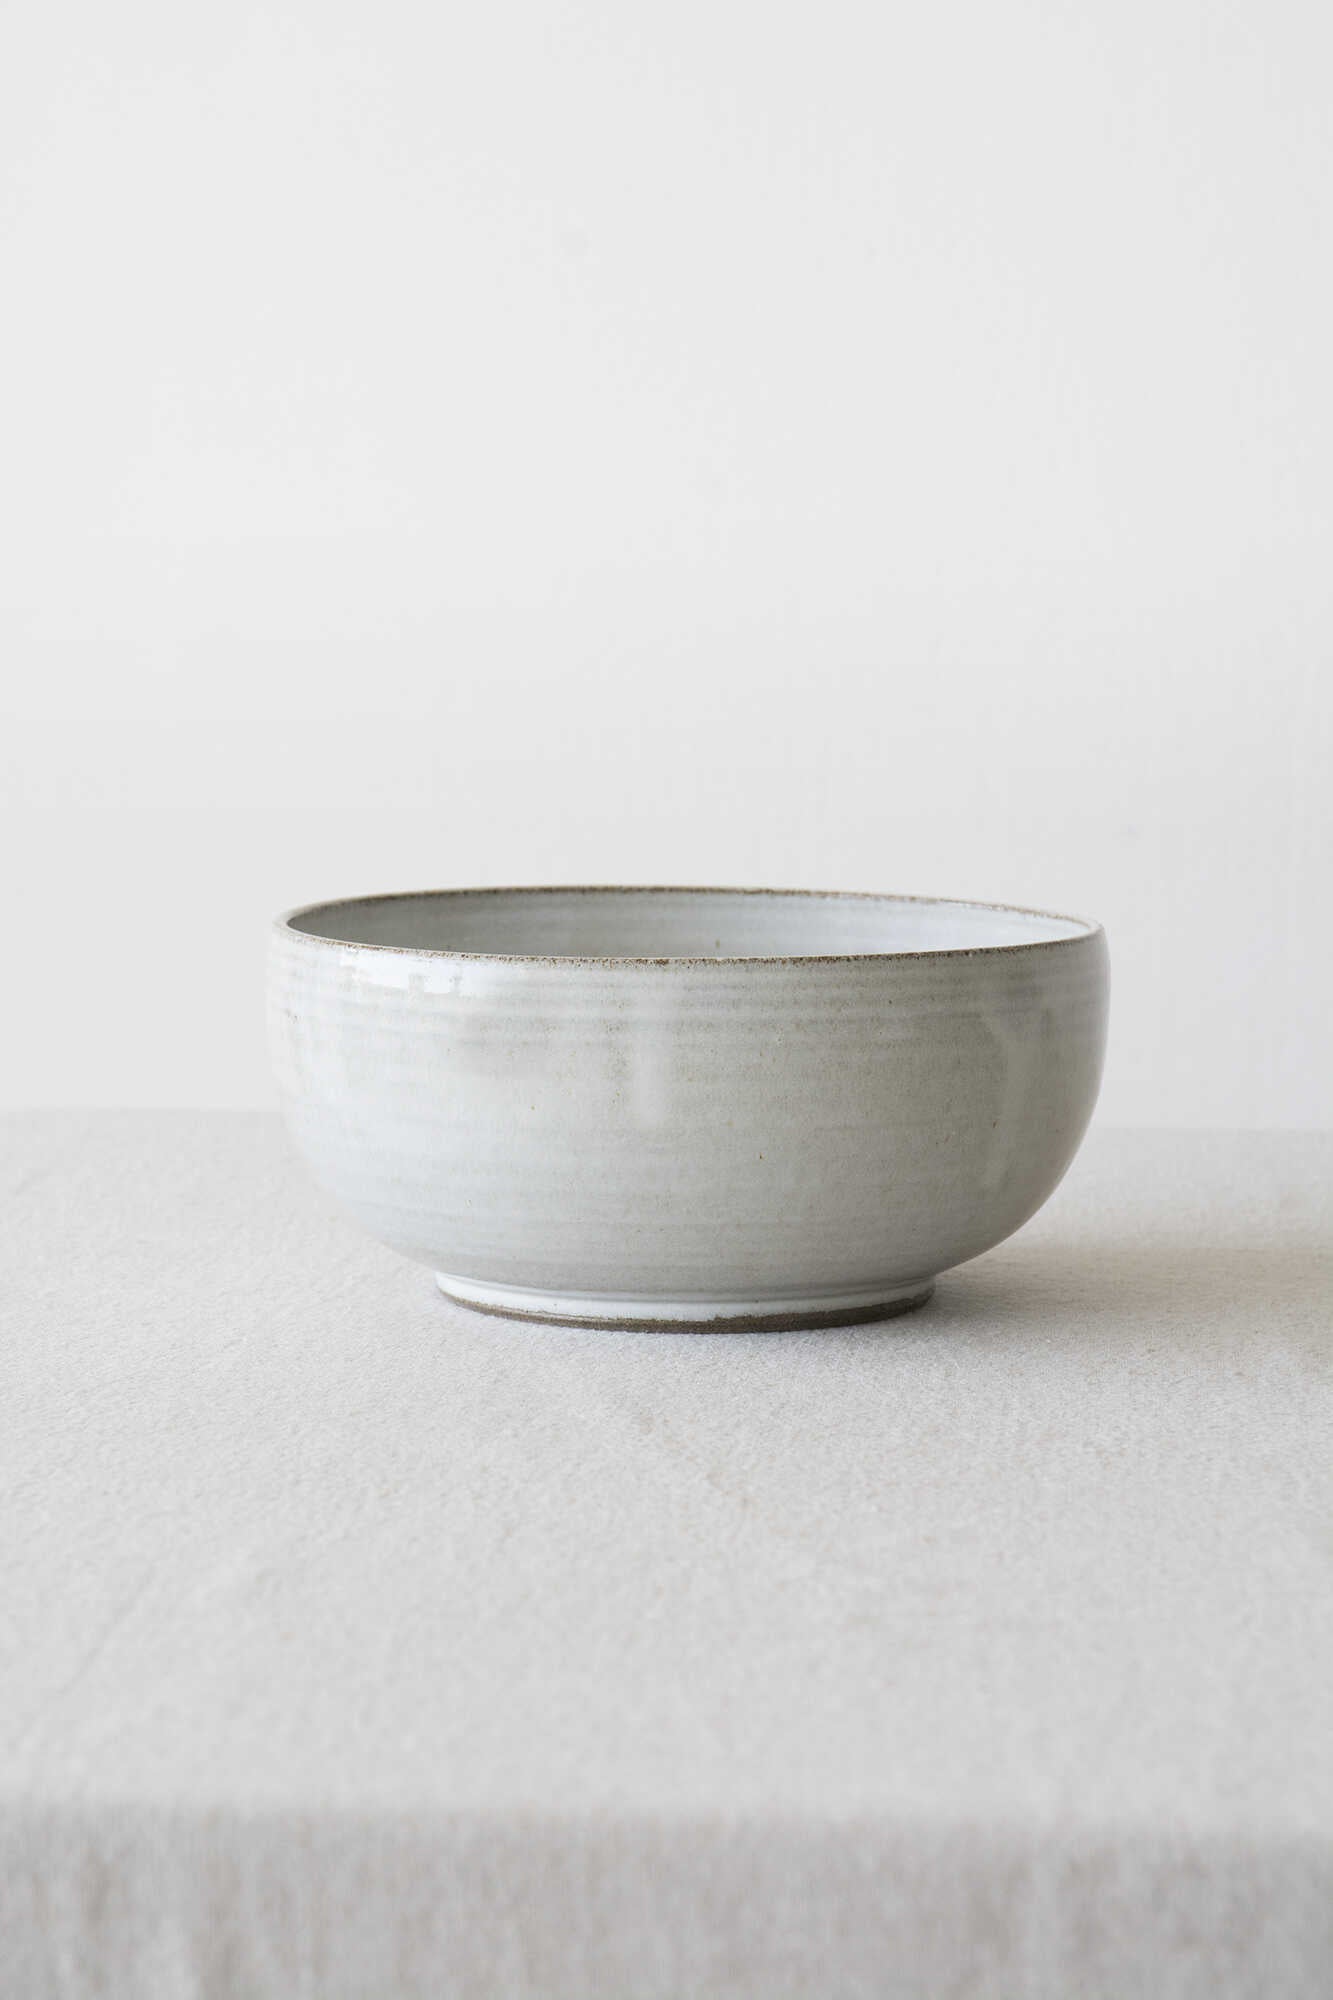 Rustic Ceramic Serving Bowl - Mad About Pottery- Bowl